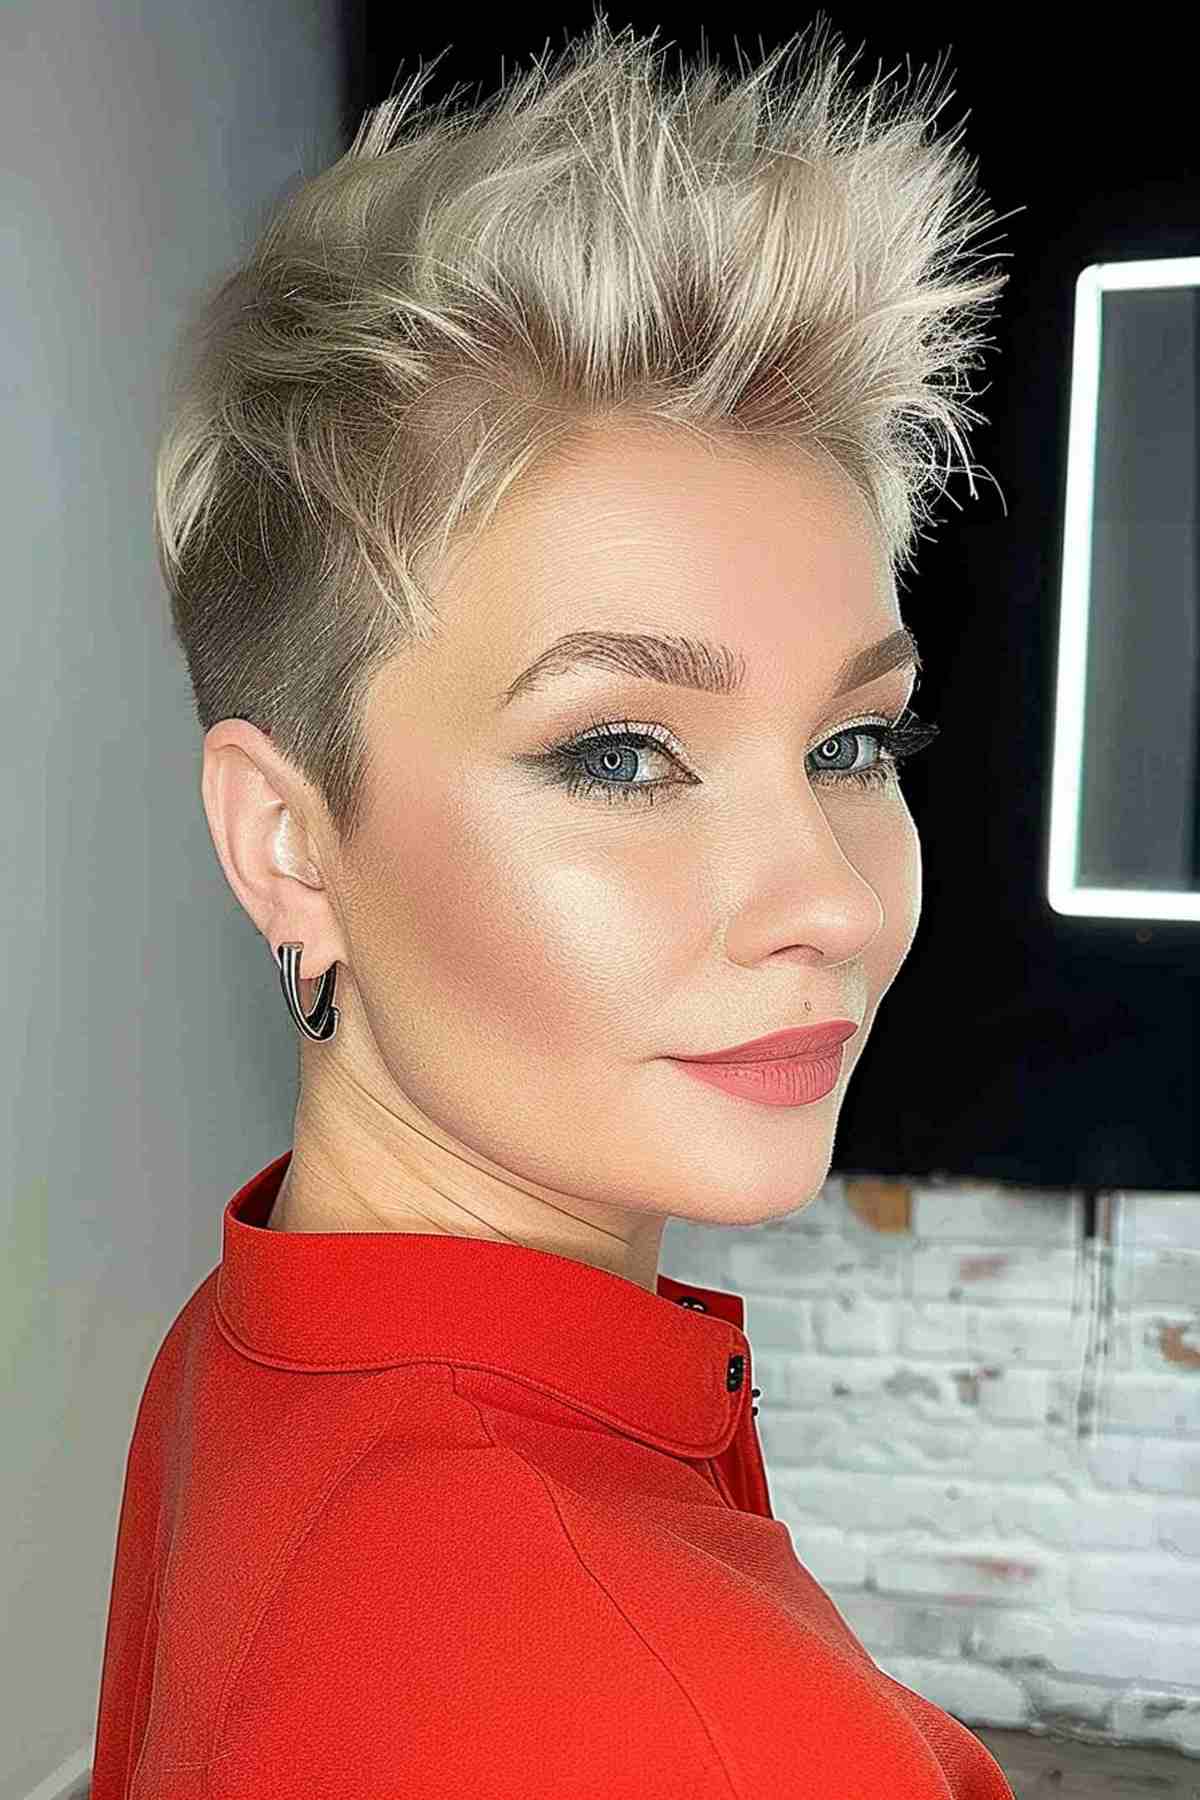 Edgy pixie cut with textured top and blonde highlights 